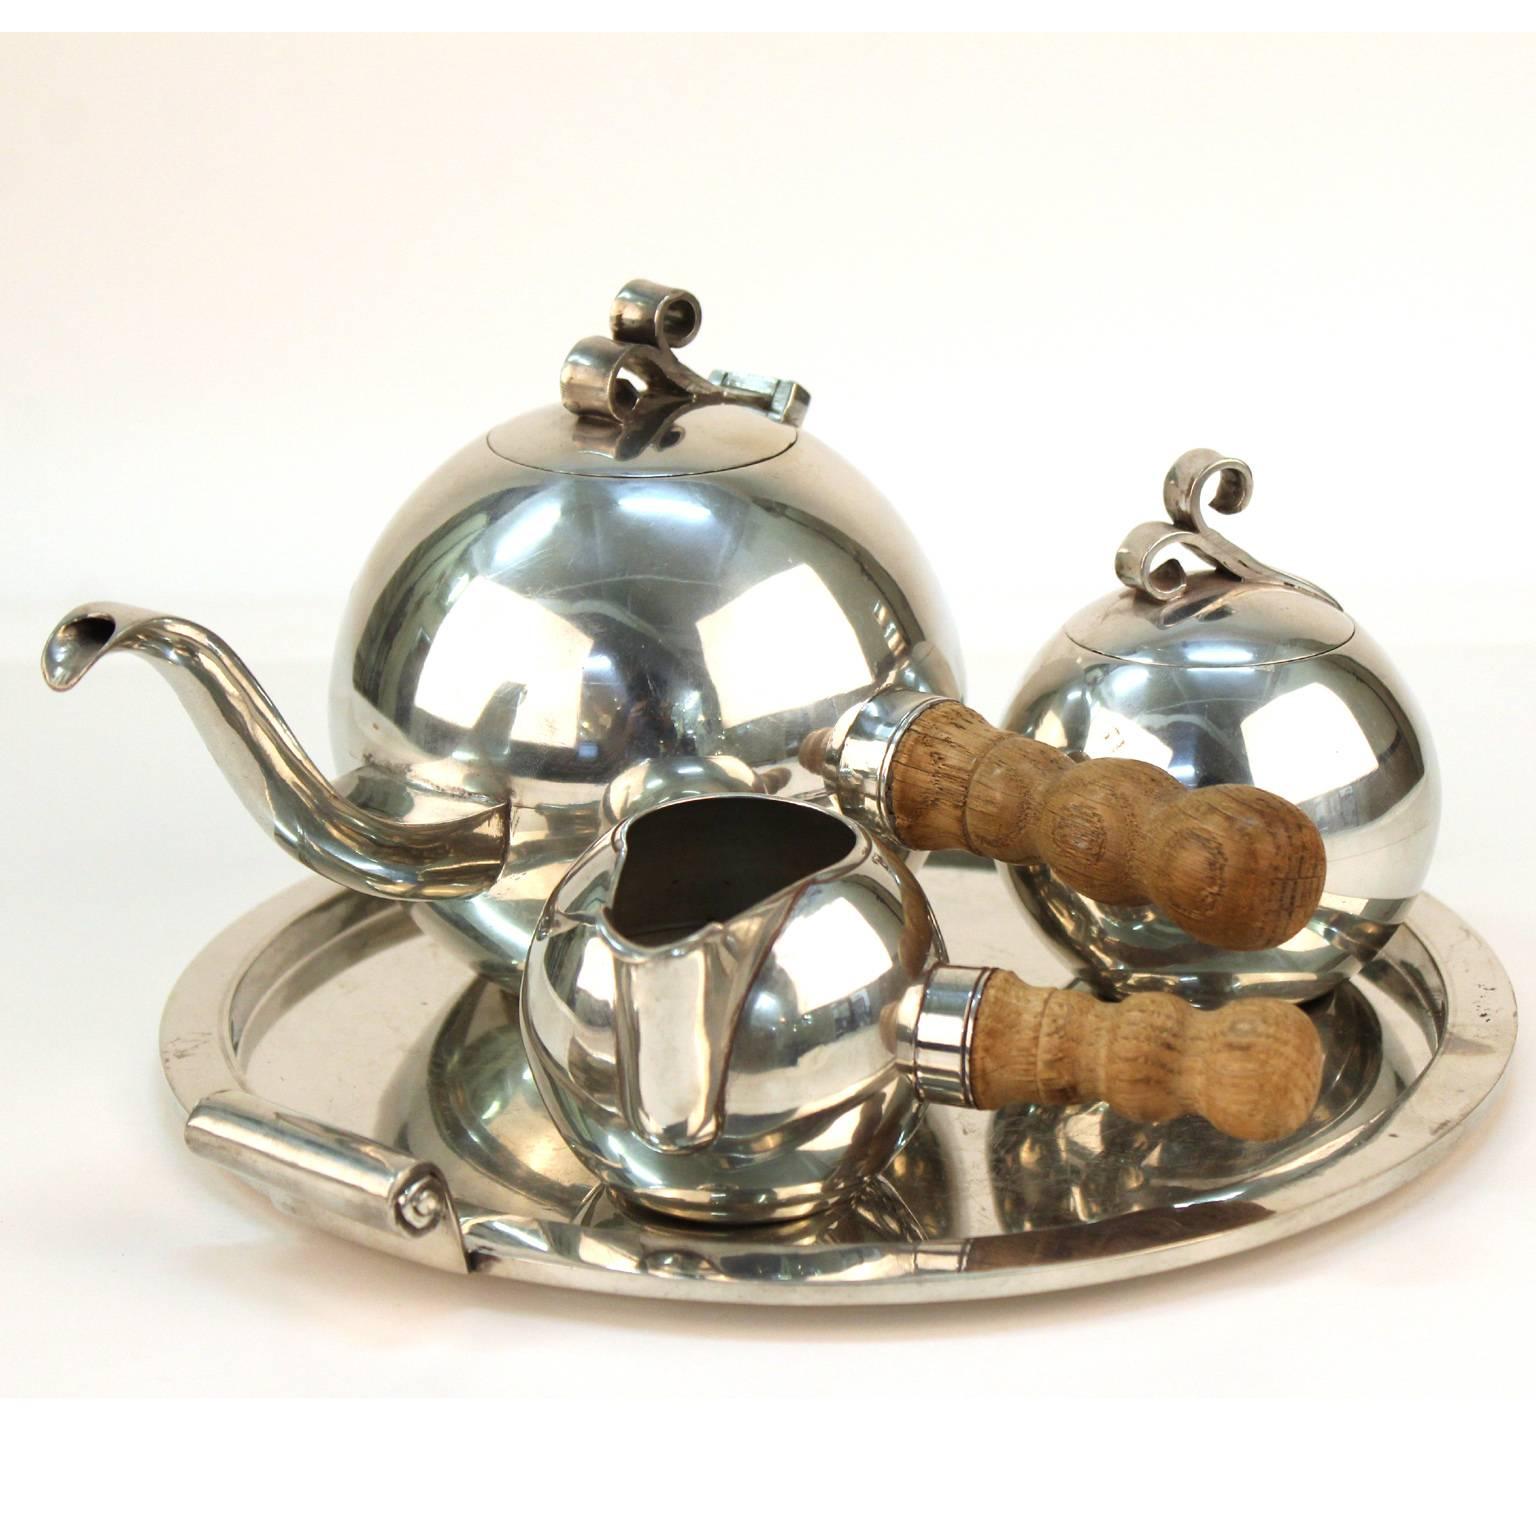 A Norwegian Art Deco pewter tea set made by Havstad in the 1920s-1930s. The set includes spherical tea pot, sugar bowl and creamer on a circular serving plate. Both the creamer and tea pot have an elegant sculpted wooden handle. Very good condition